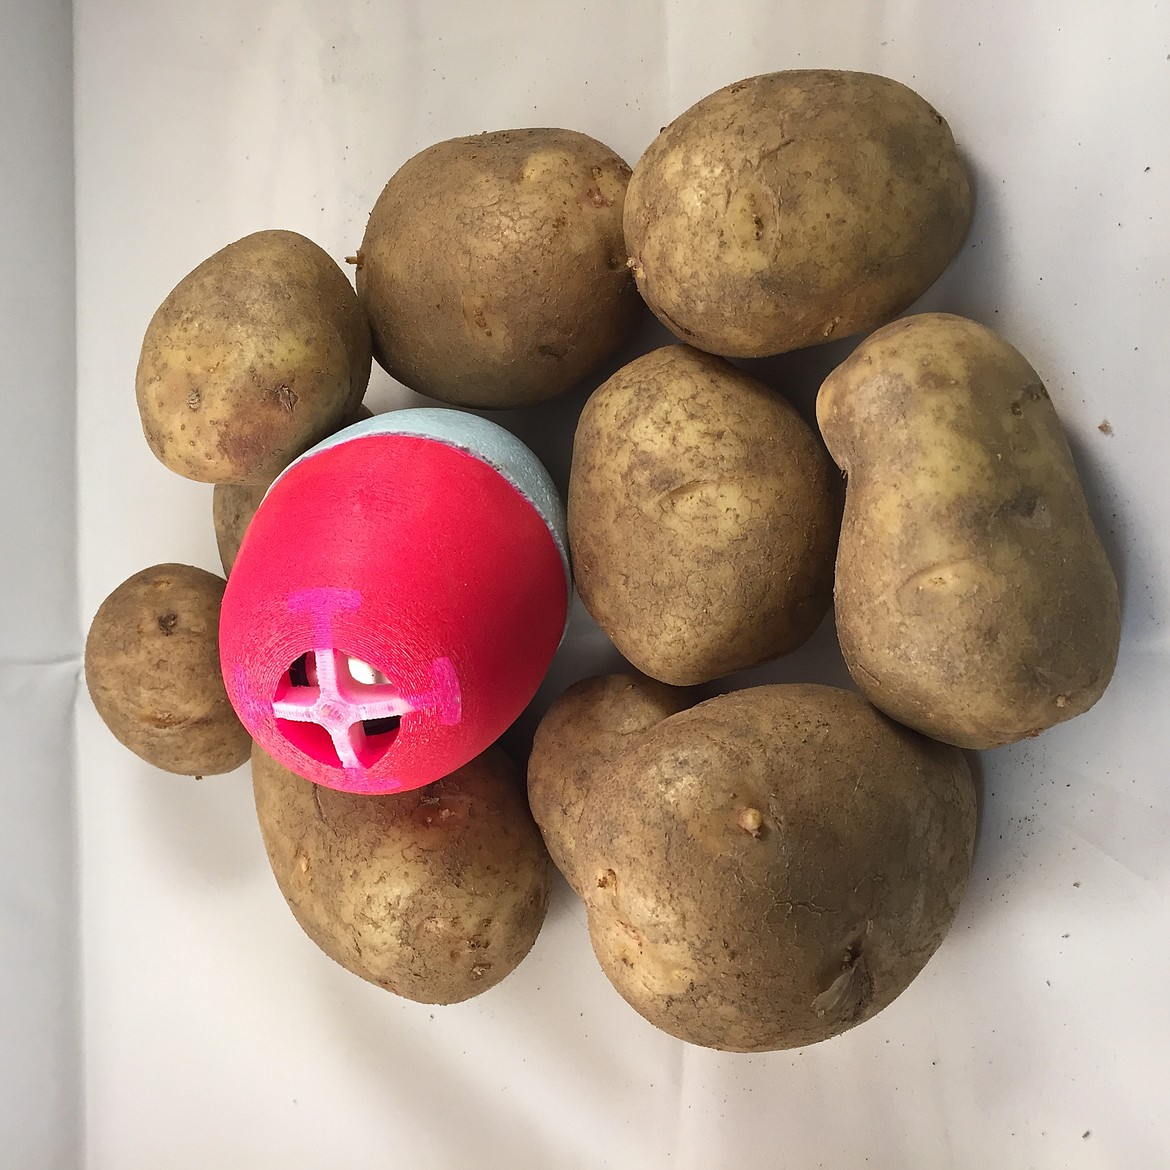 A SmartSpud in a small pile of potatoes.